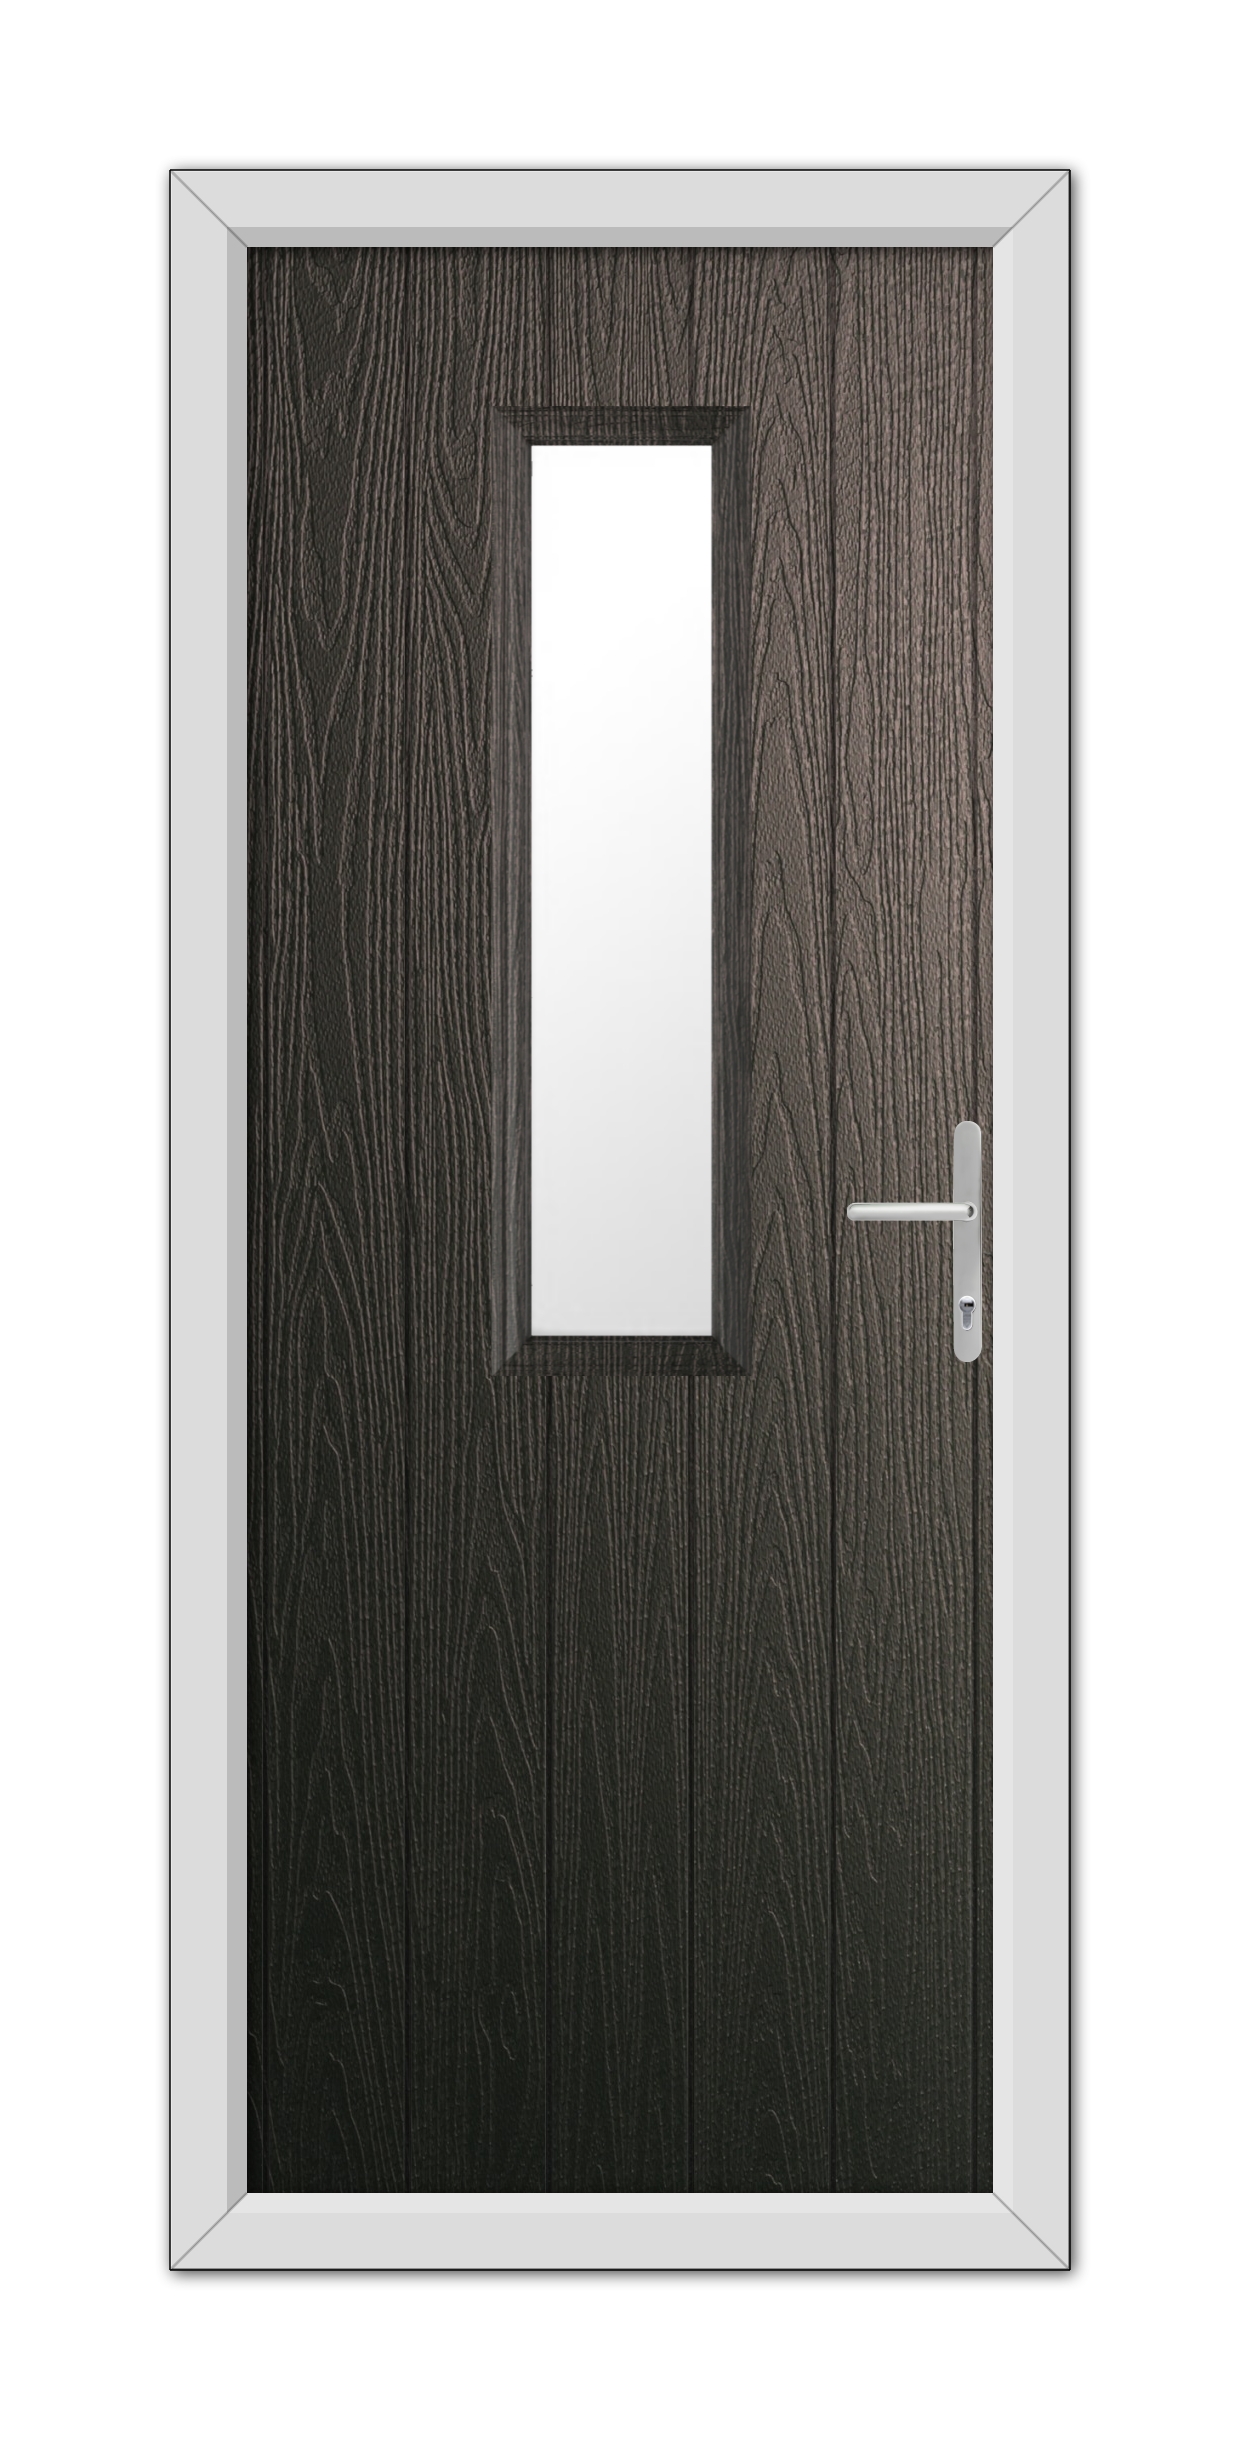 A Schwarzbraun Mowbray Composite Door 48mm Timber Core with a narrow vertical window and a silver handle, set in a white frame, isolated on a white background.